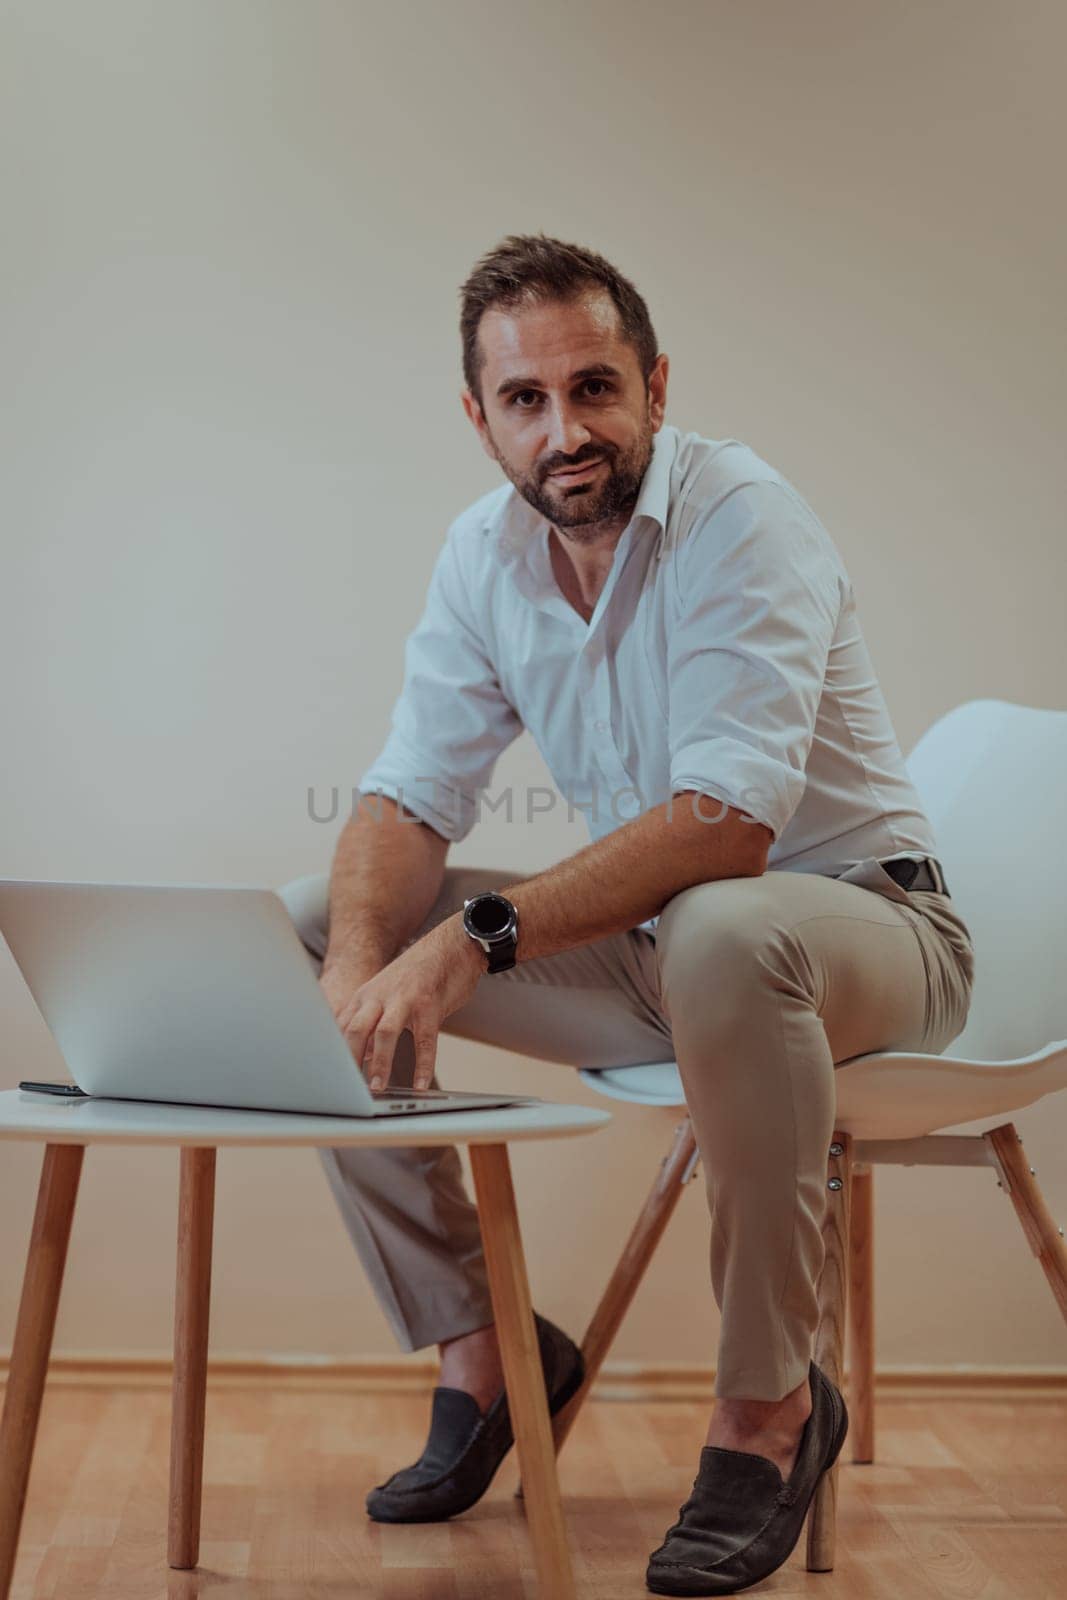 A confident businessman sitting and using laptop with a determined expression, while a beige background enhances the professional atmosphere, showcasing his productivity and expertise. by dotshock